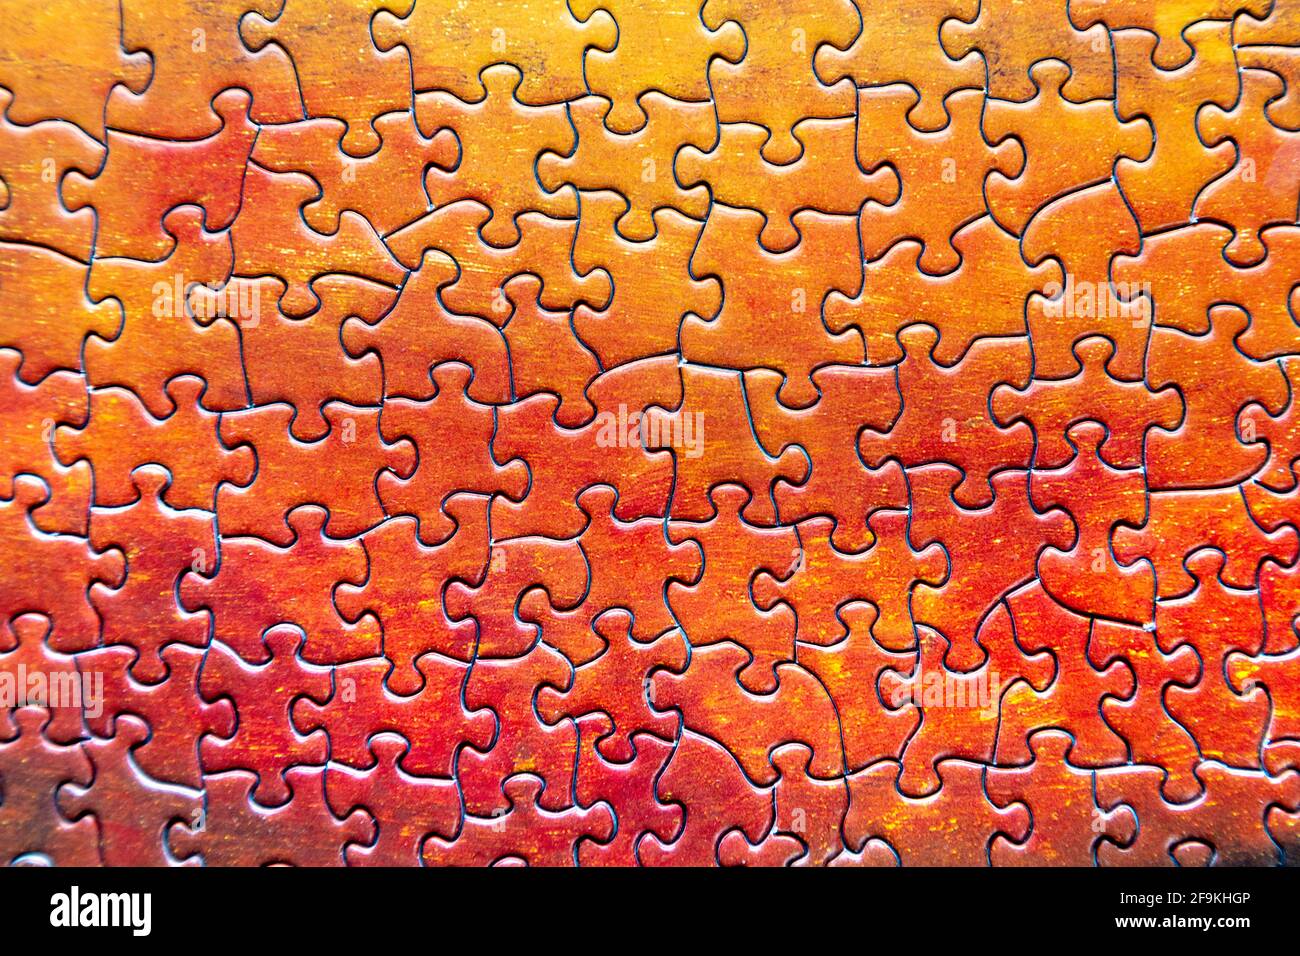 Vibrant orange and red jigsaw puzzle pieces background Stock Photo